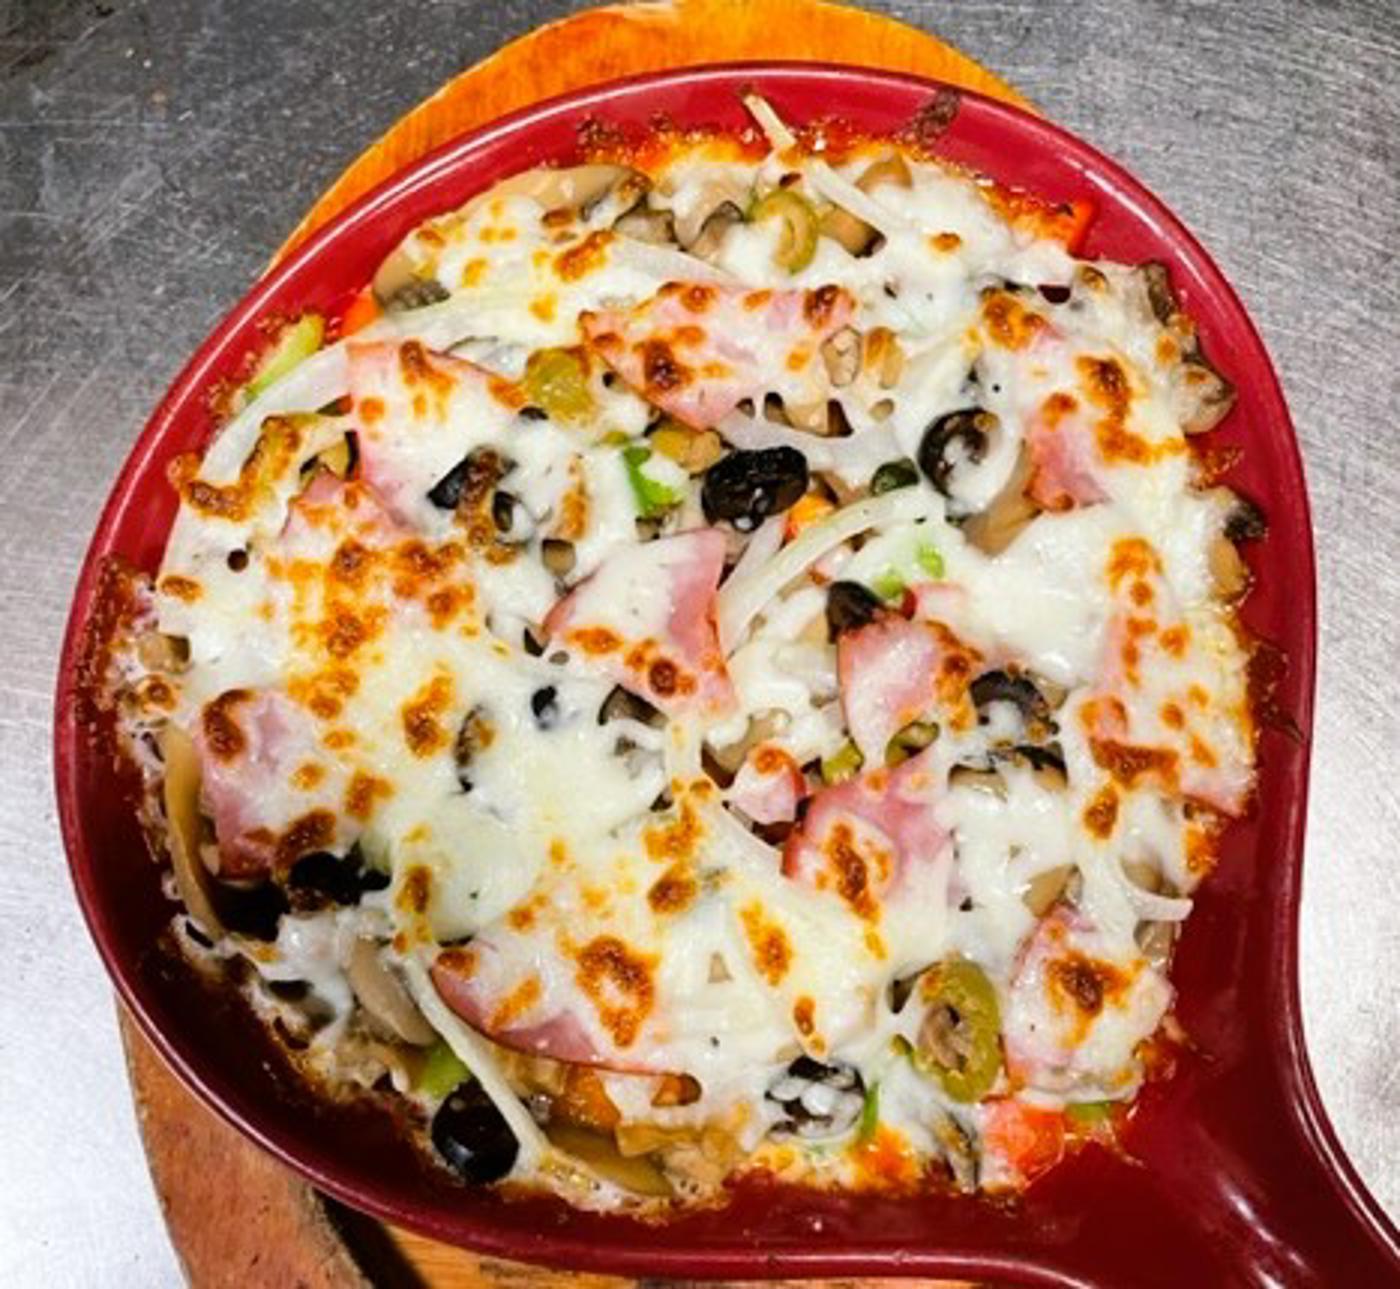 The Skillet Pizza